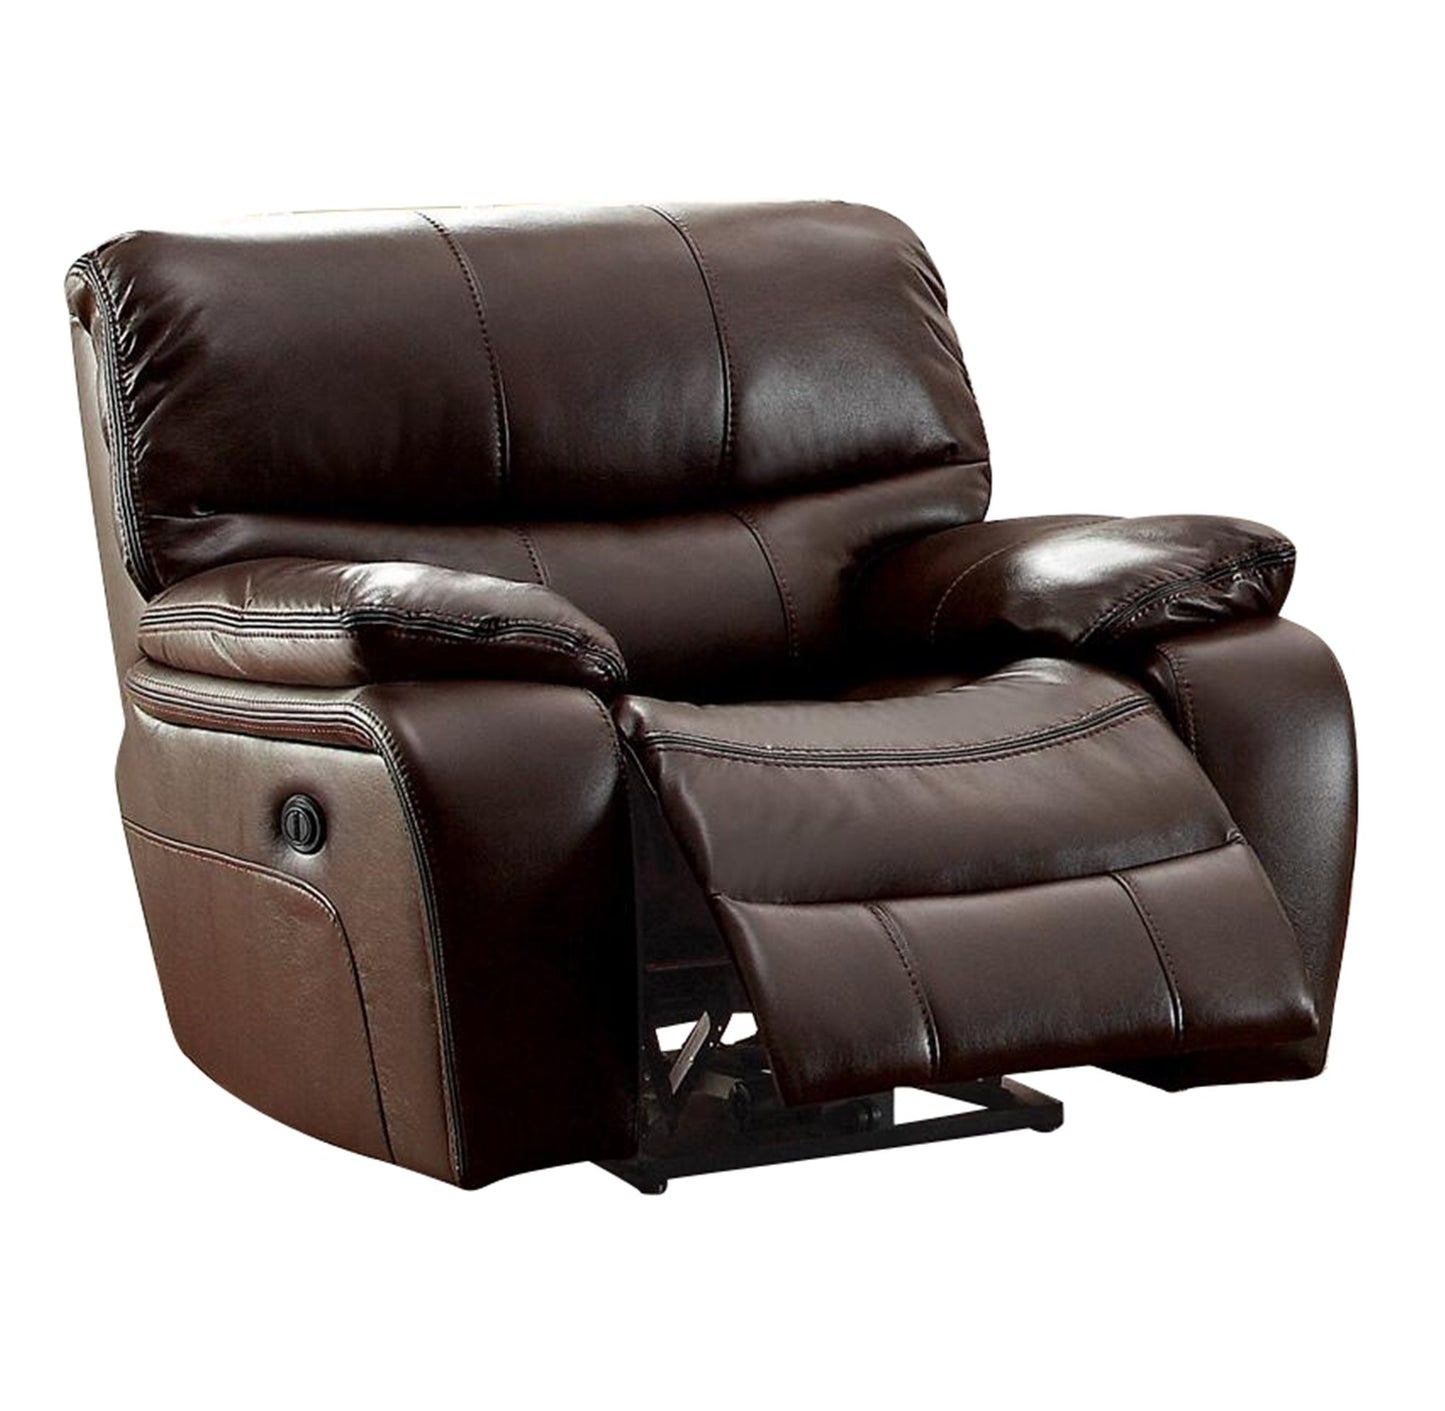 Homelegance All foam 3PC Double Reclining Sofa, Double Reclining Love Seat & Glider Reclining Chair in Leather - Dark Brown